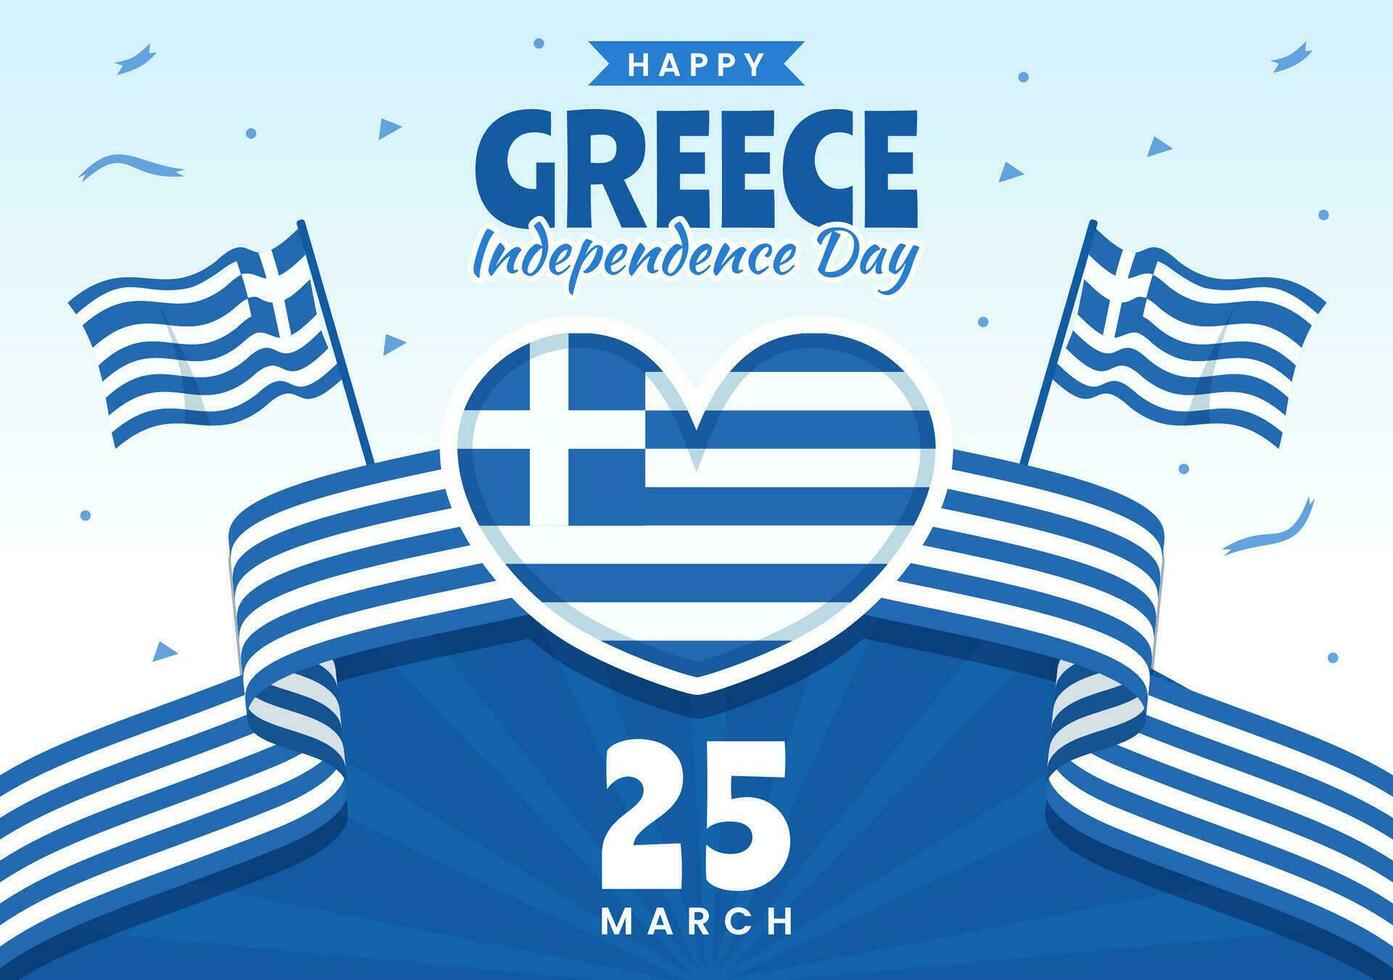 Happy Greece Independence Day Vector Illustration on March 25th with Greek Flag and Ribbon in National Holiday Flat Cartoon Background Design